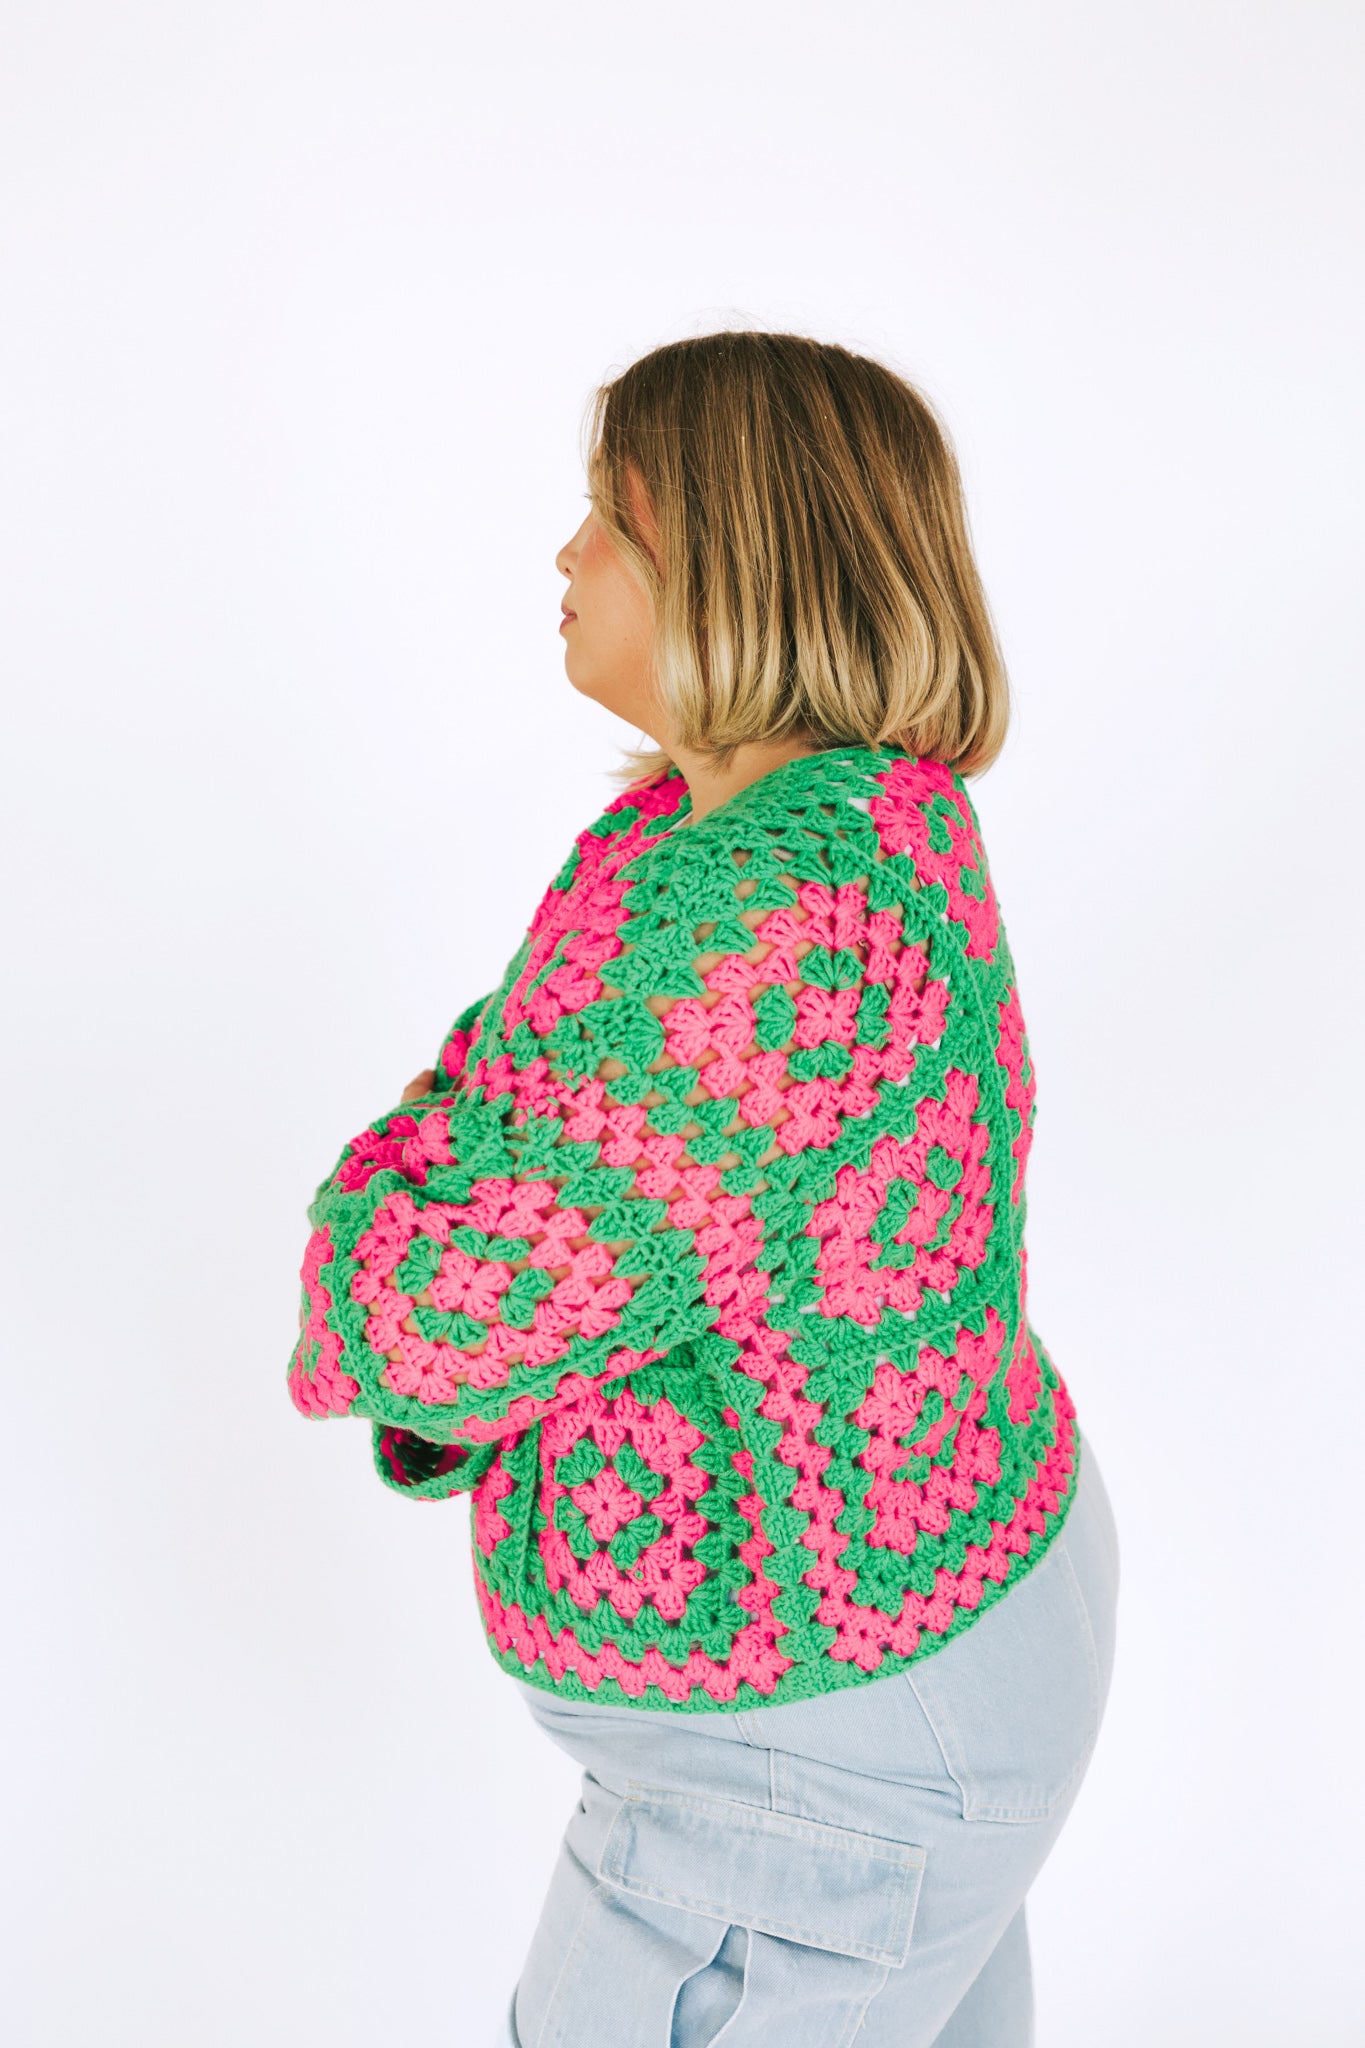 PLUS SIZE - Pieces Of You Cardigan